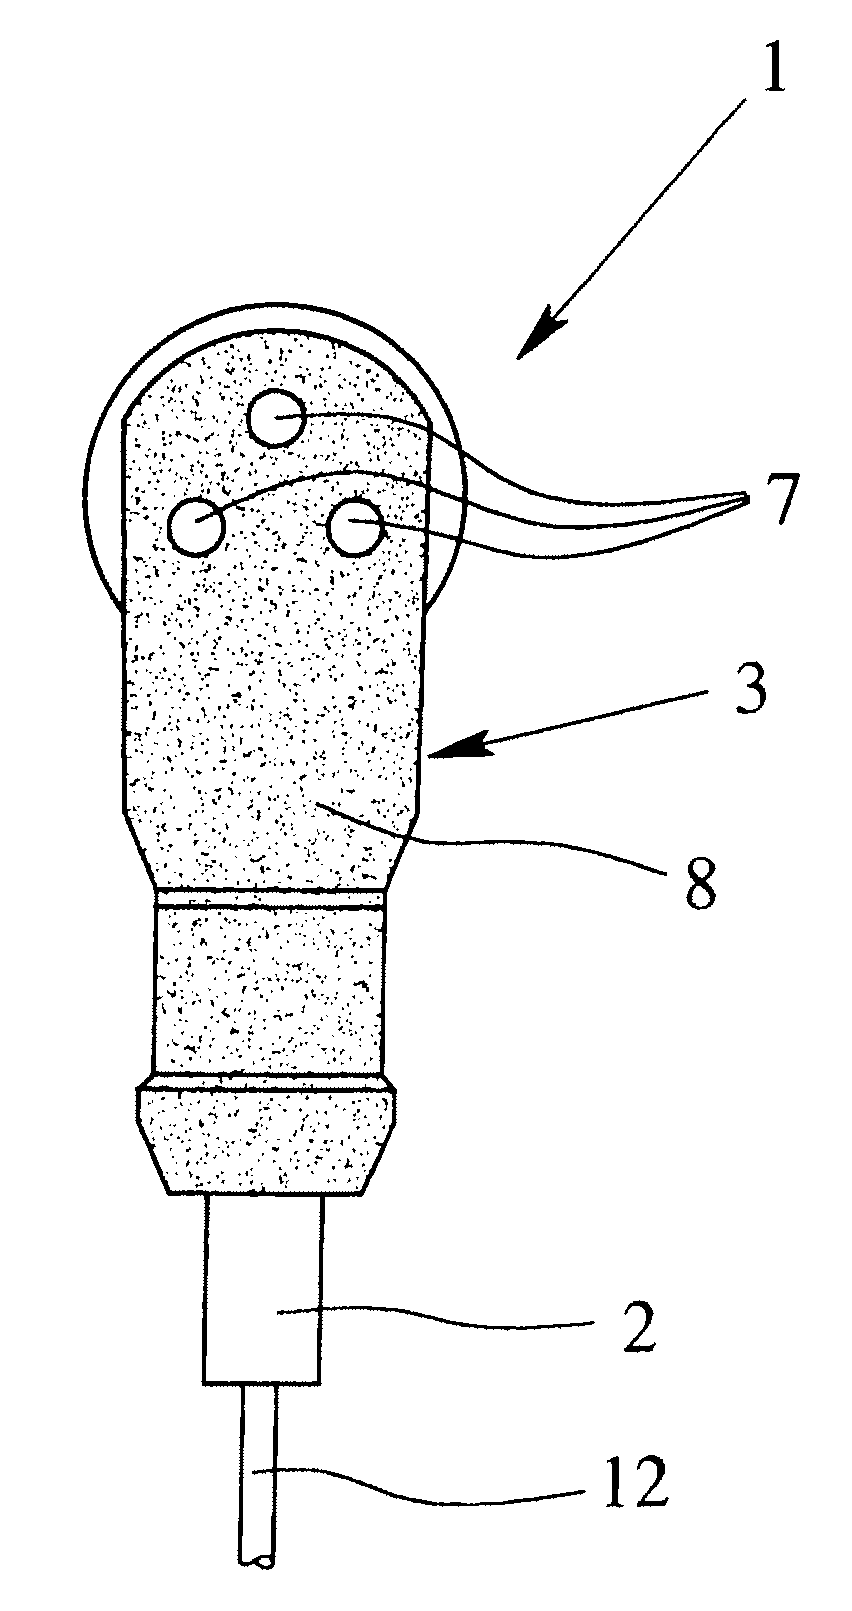 Electrical plug connector